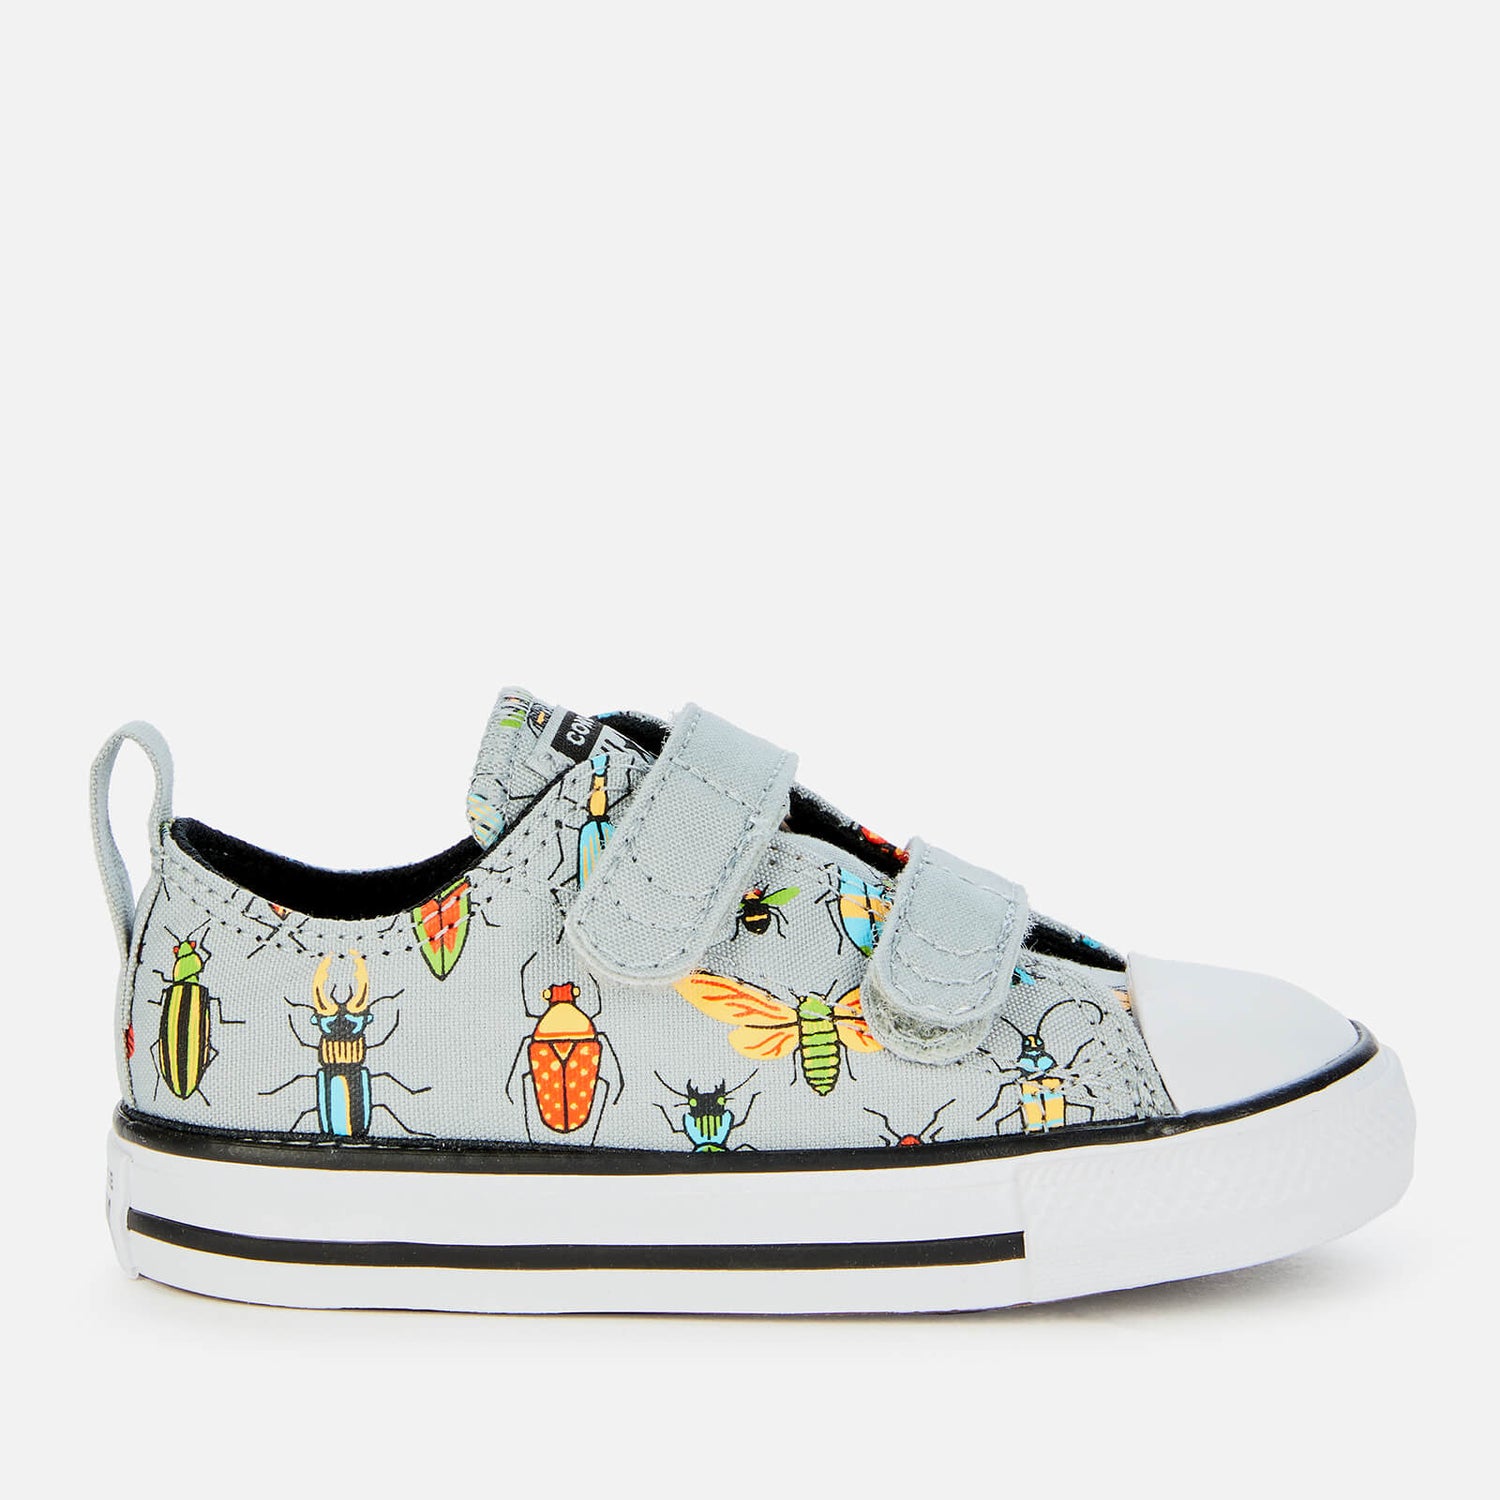 Converse Toddlers' Chuck Taylor All Star Velcro Bugged Out Ox Trainers - Ash Stone/Black/Bright Poppy